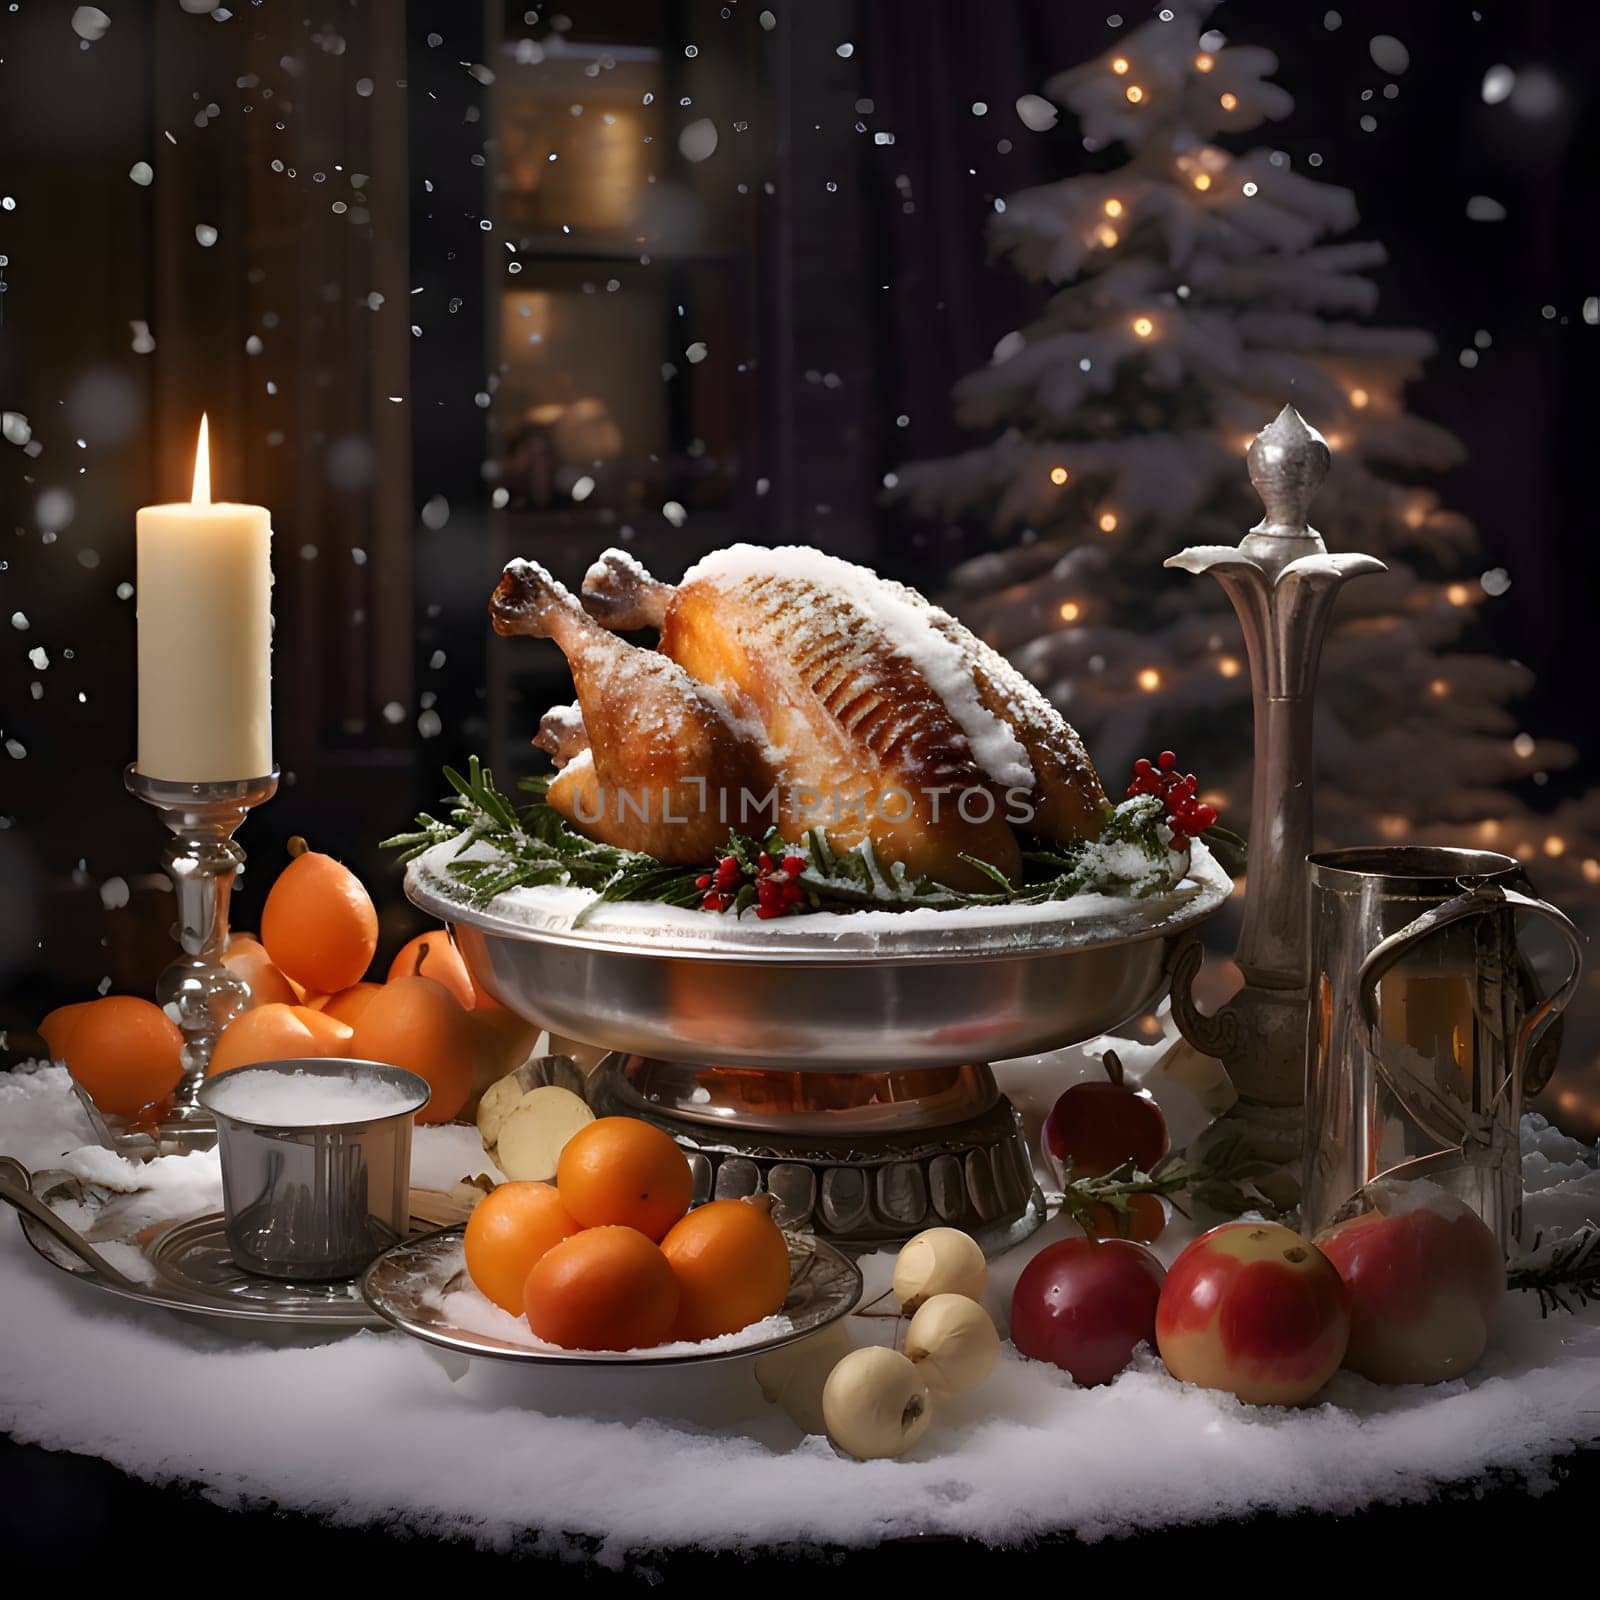 Roast turkey vegetables fruits falling snow and Christmas tree. Turkey as the main dish of thanksgiving for the harvest. An atmosphere of joy and celebration.